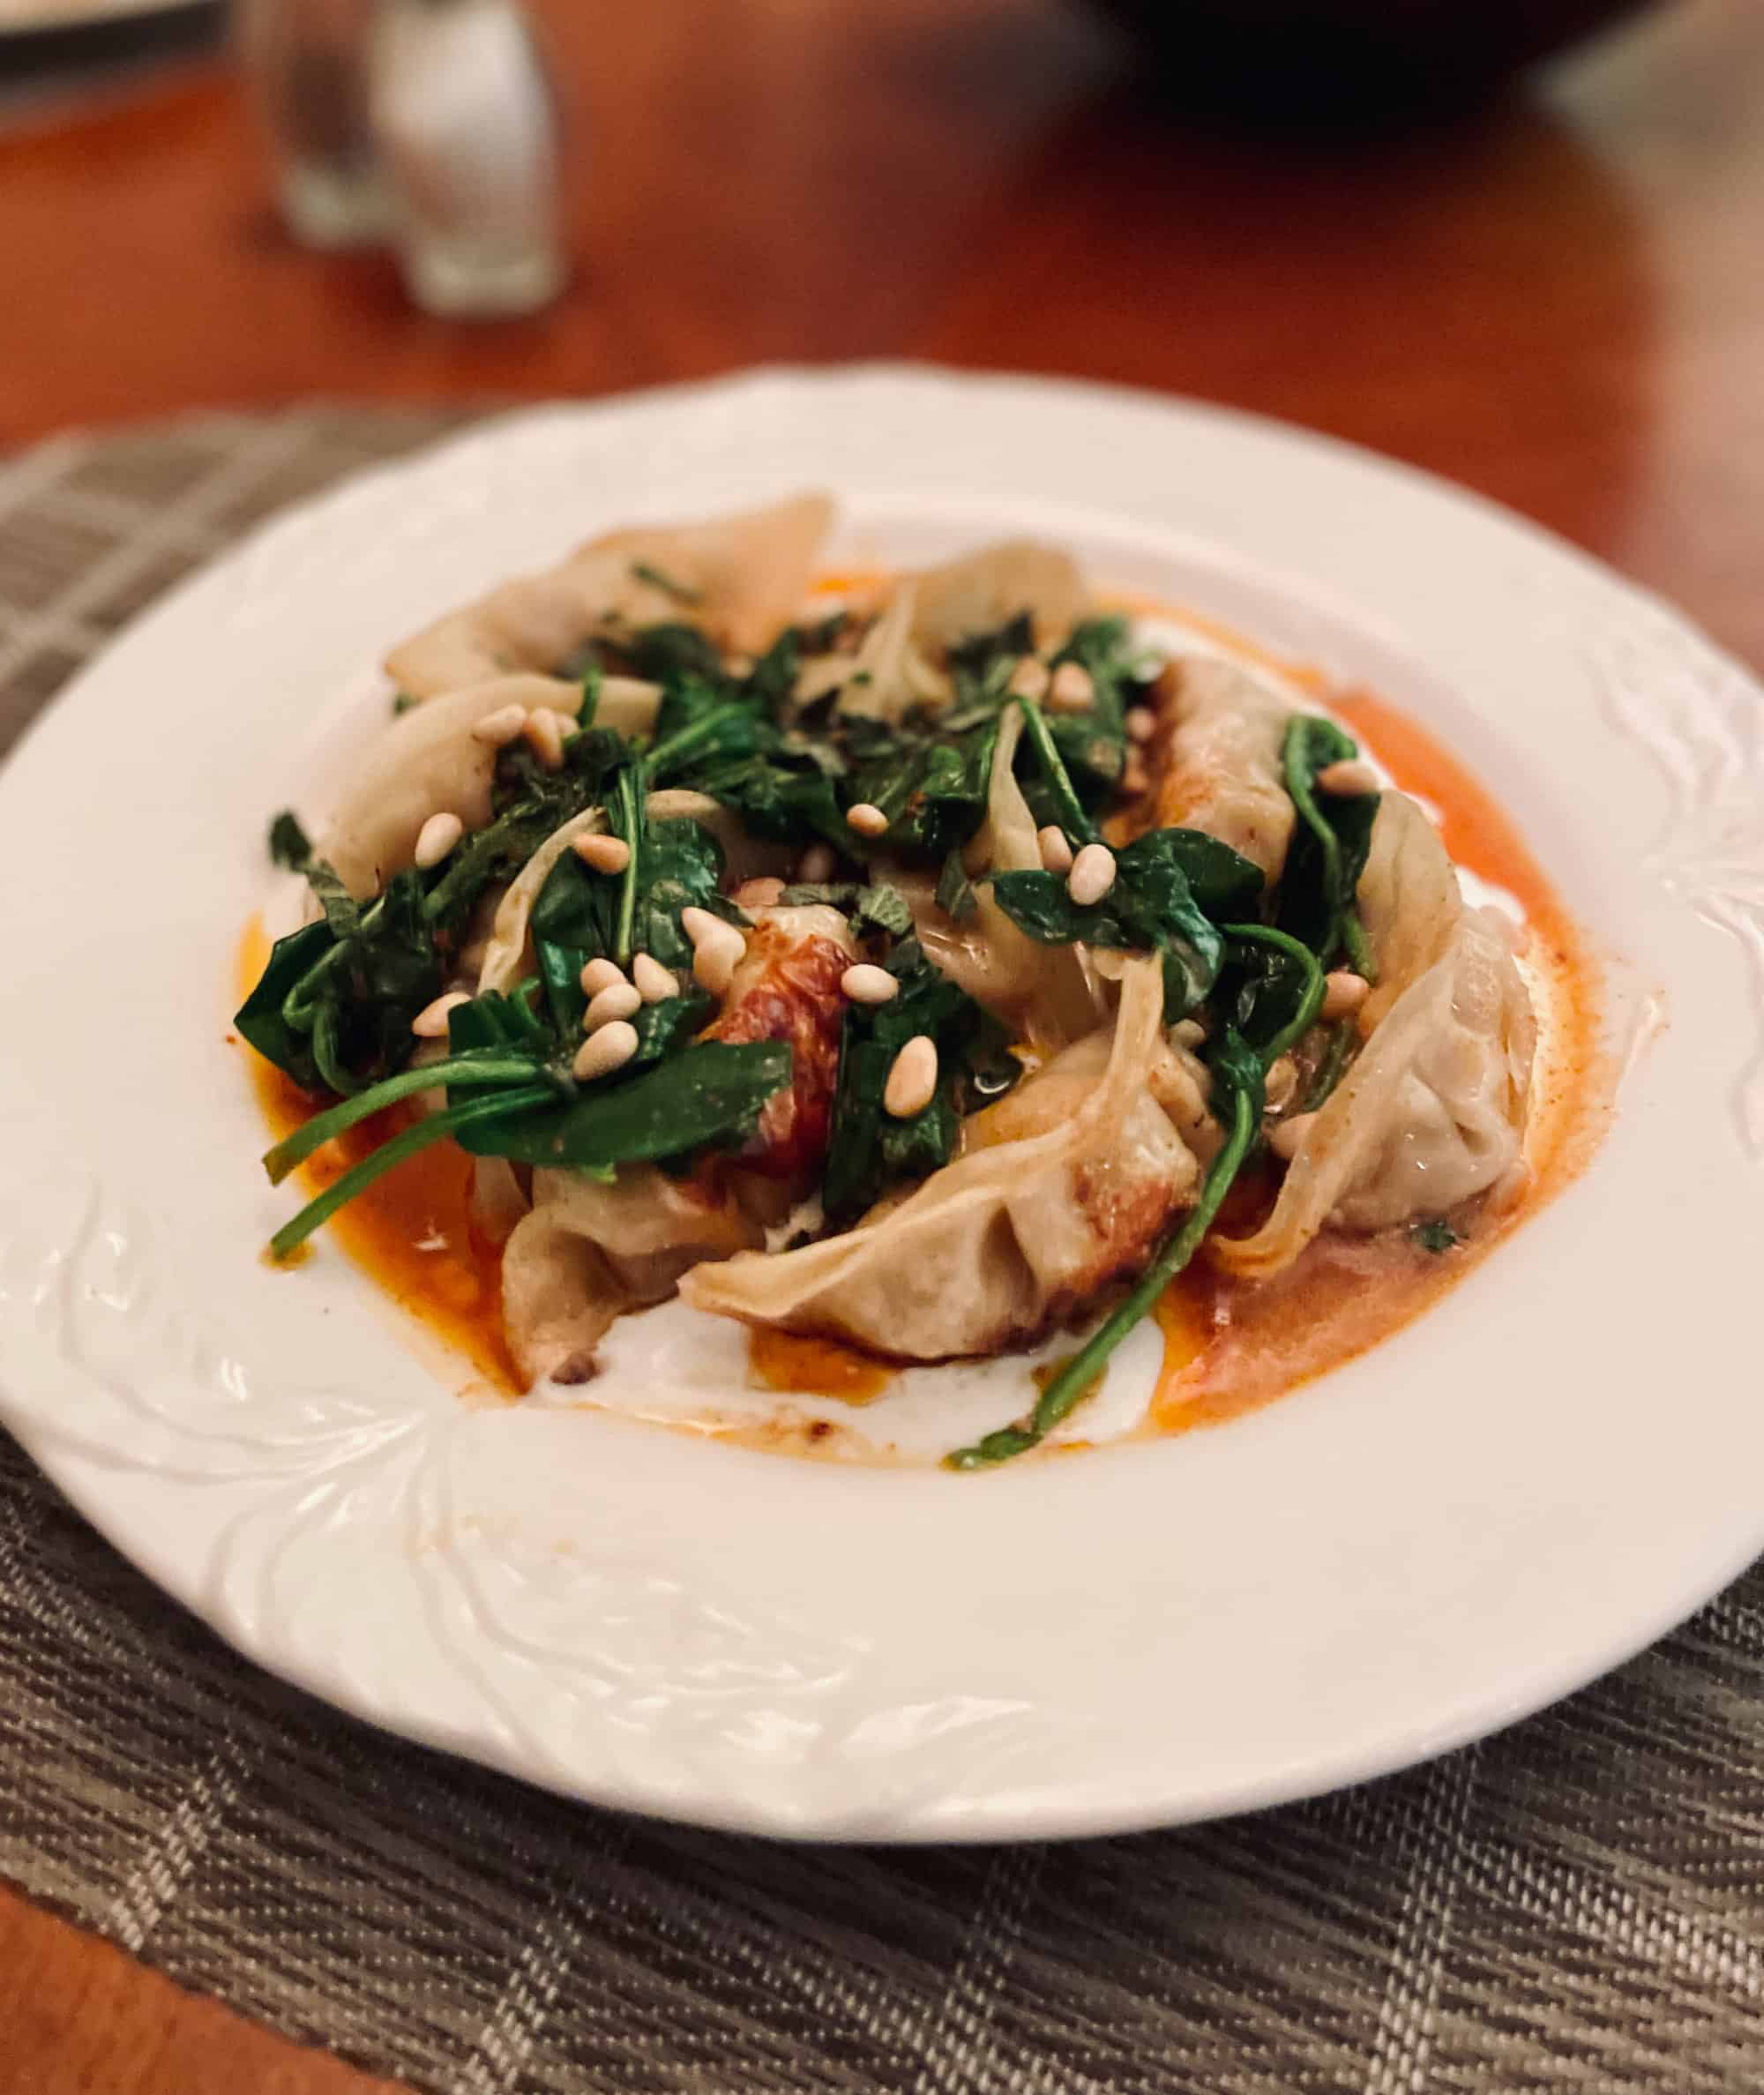 STORE-BOUGHT ASIAN DUMPLINGS WITH GREENS AND CHILE BUTTER